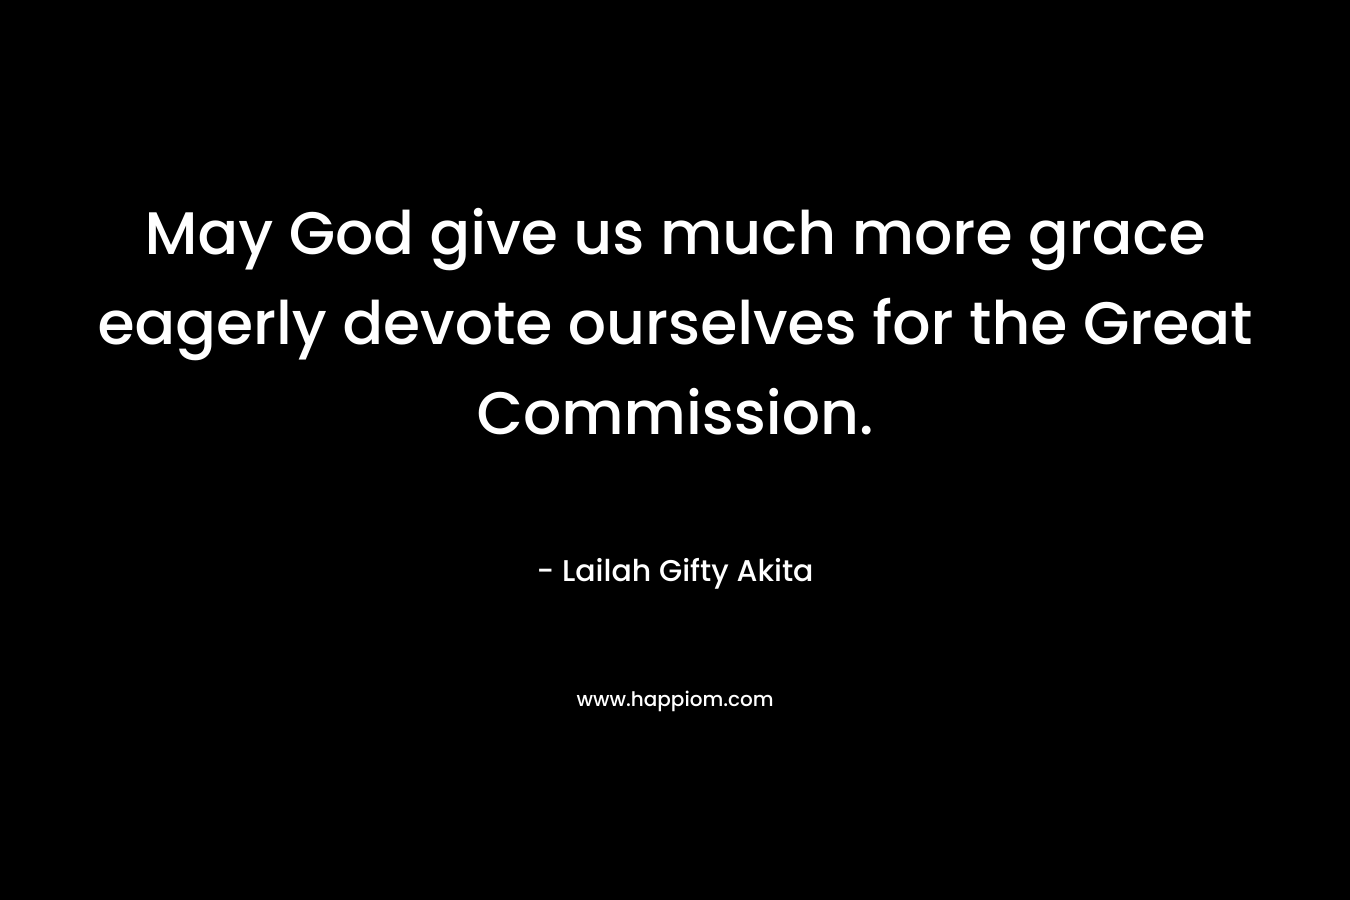 May God give us much more grace eagerly devote ourselves for the Great Commission.